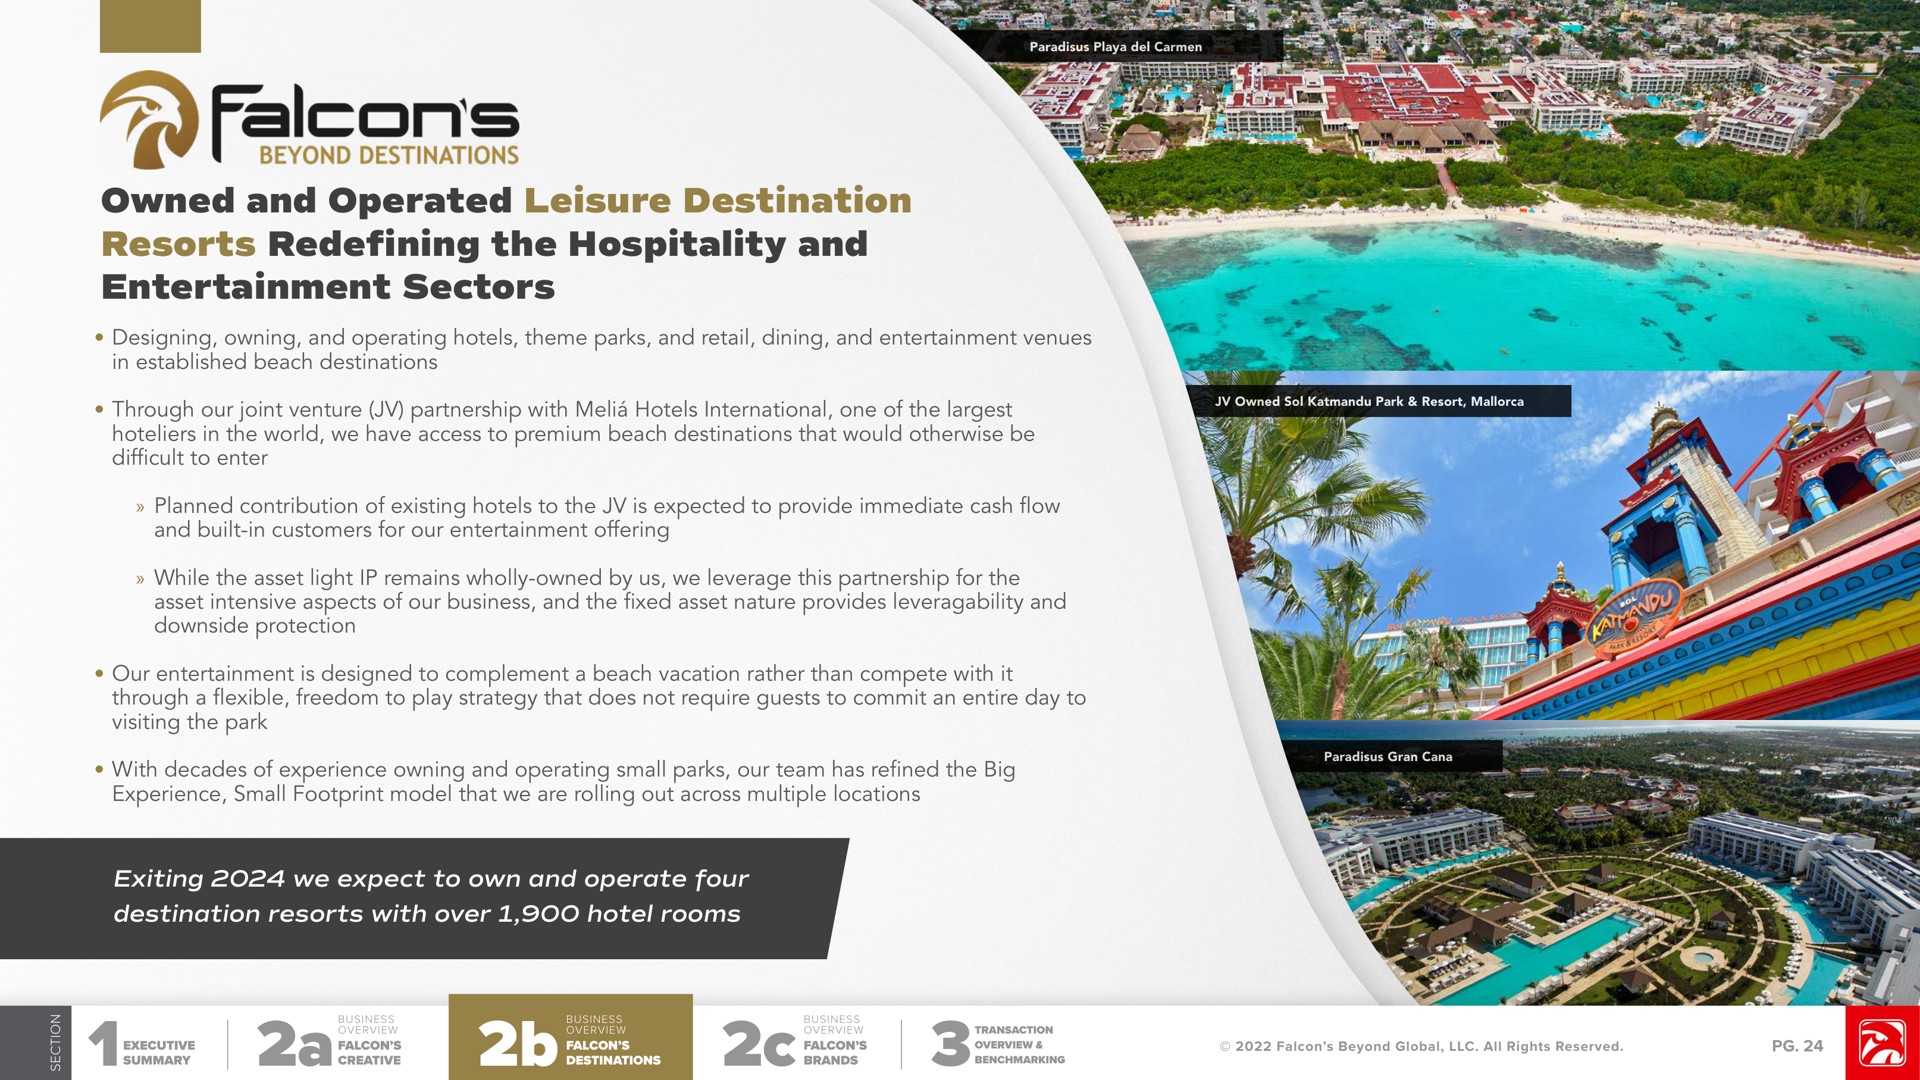 owned and operated leisure destination resorts redefining the hospitality and entertainment sectors exiting we expect to own and operate four destination resorts with over hotel rooms falcons | Falcon's Beyond